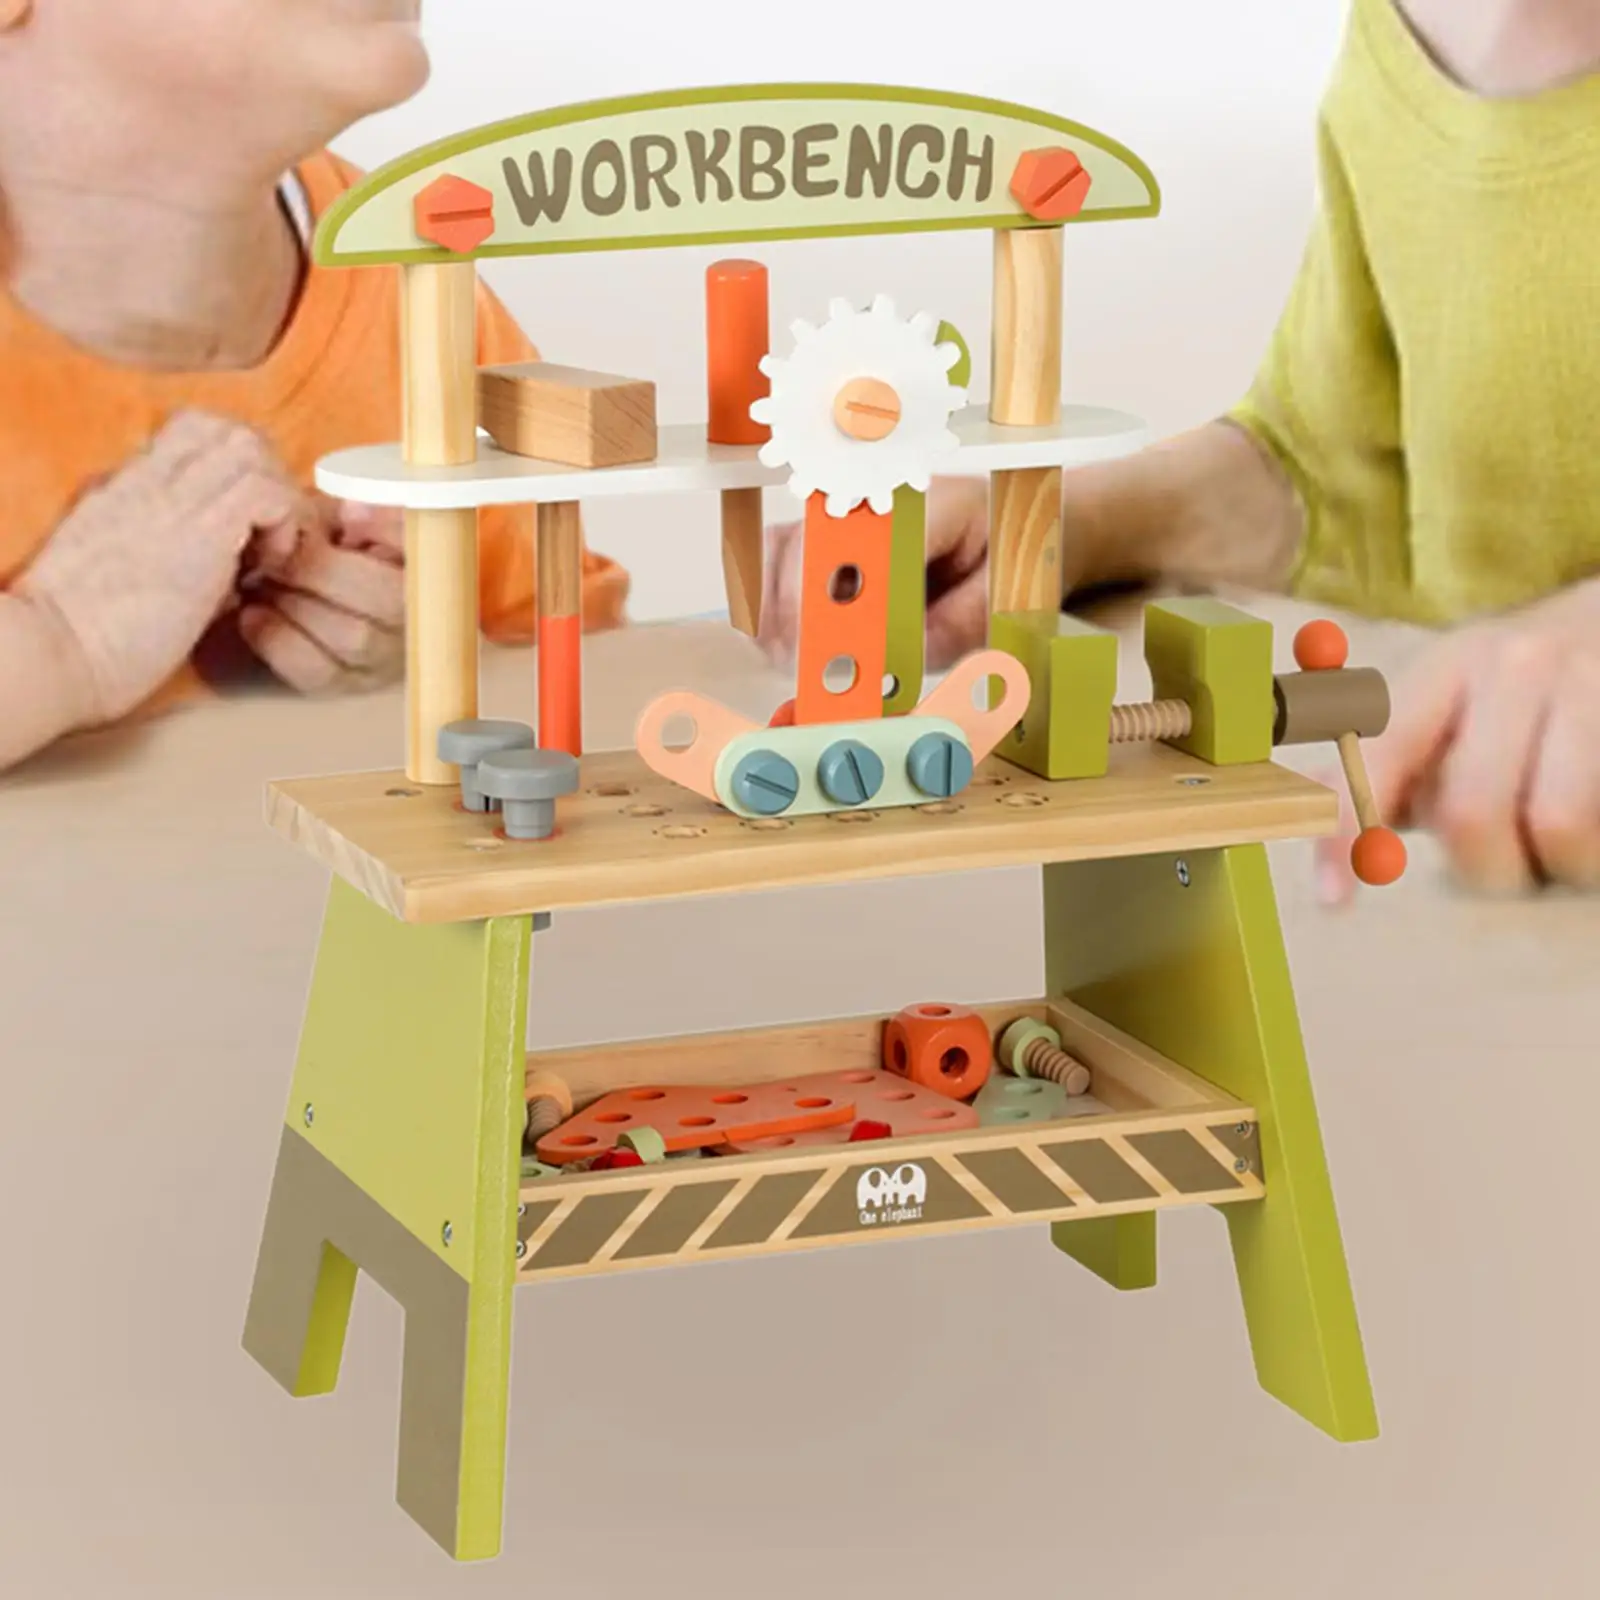 Small Wooden Kid Workbench Toy DIY Playset Creative Children Repair Play Tool Set for Ages 3+ Girls Boys Child Holiday Present